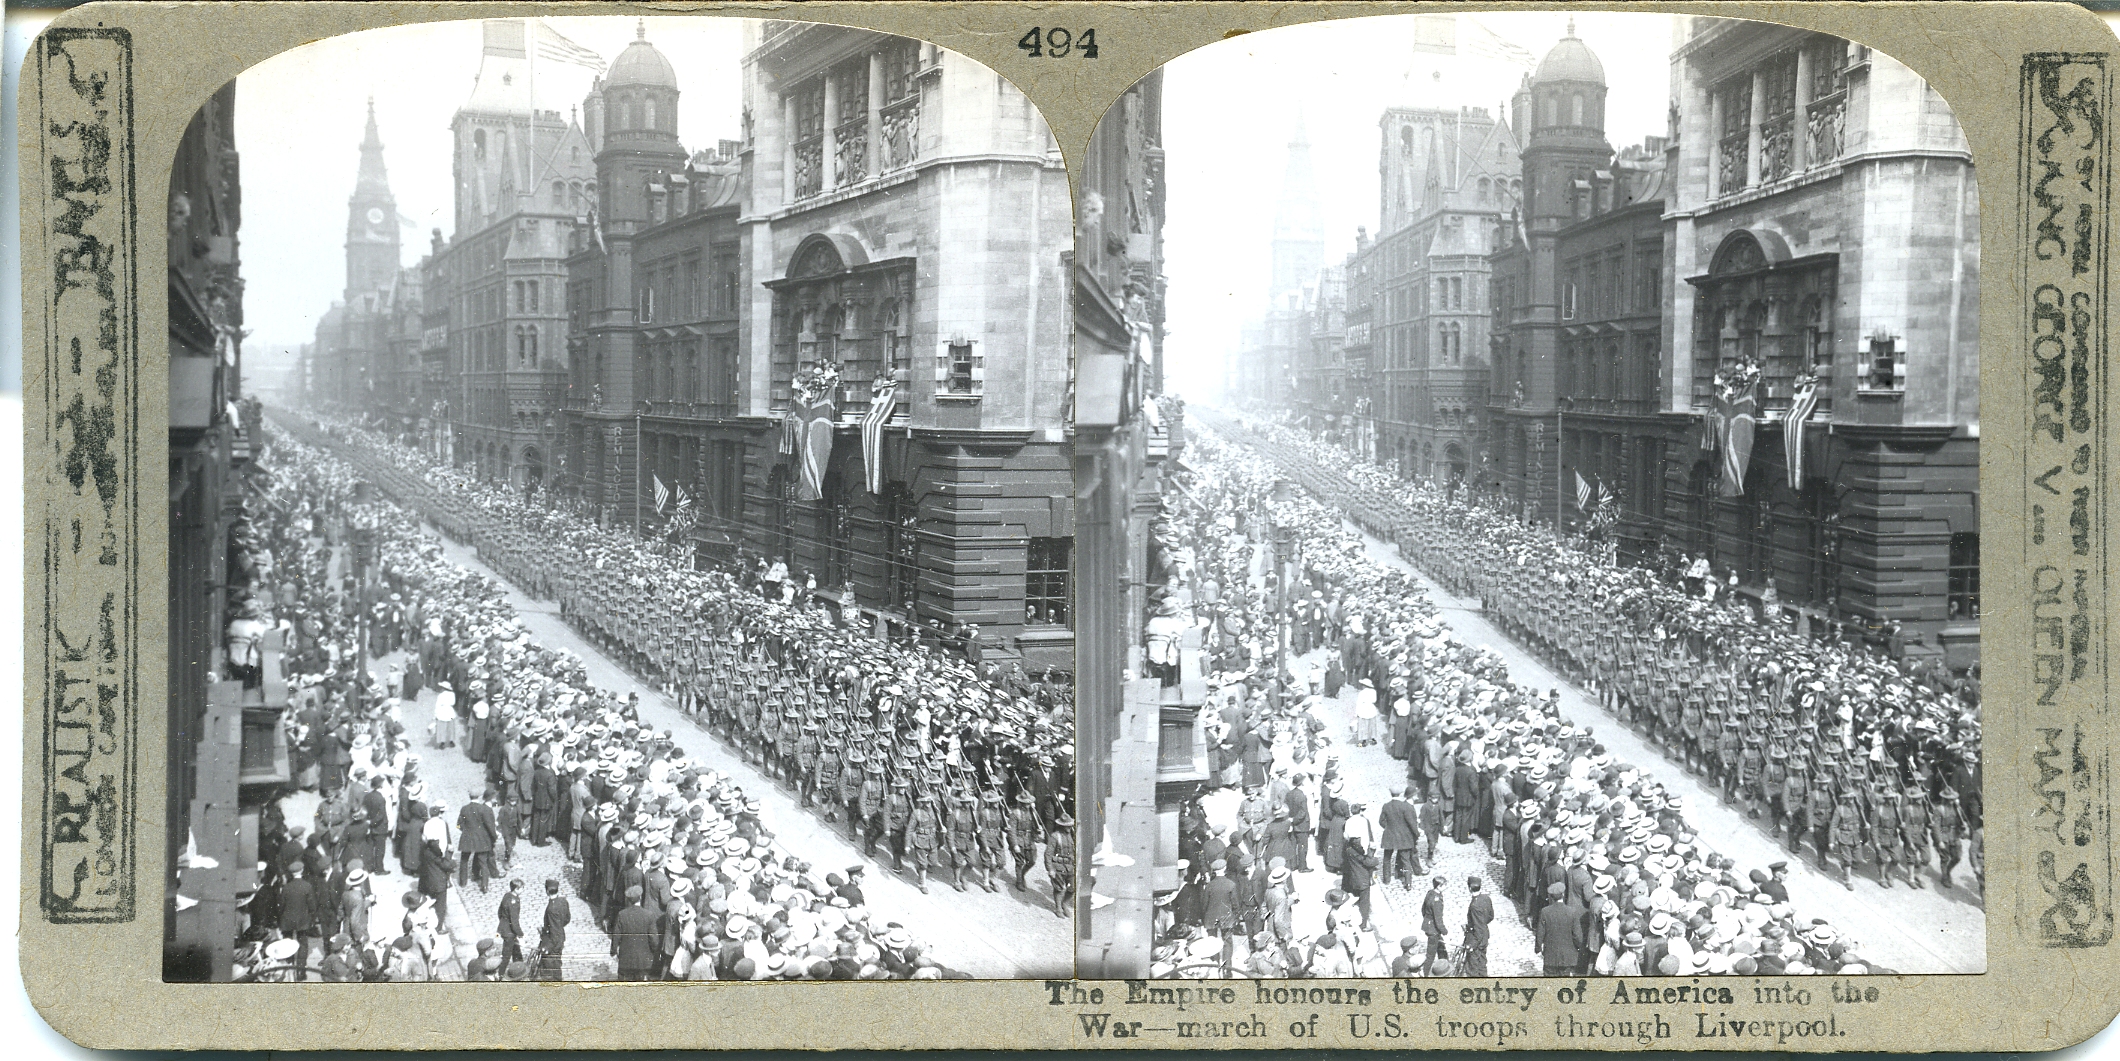 The Empire honours the entry of America into the War--march of U.S. troops through Liverpool